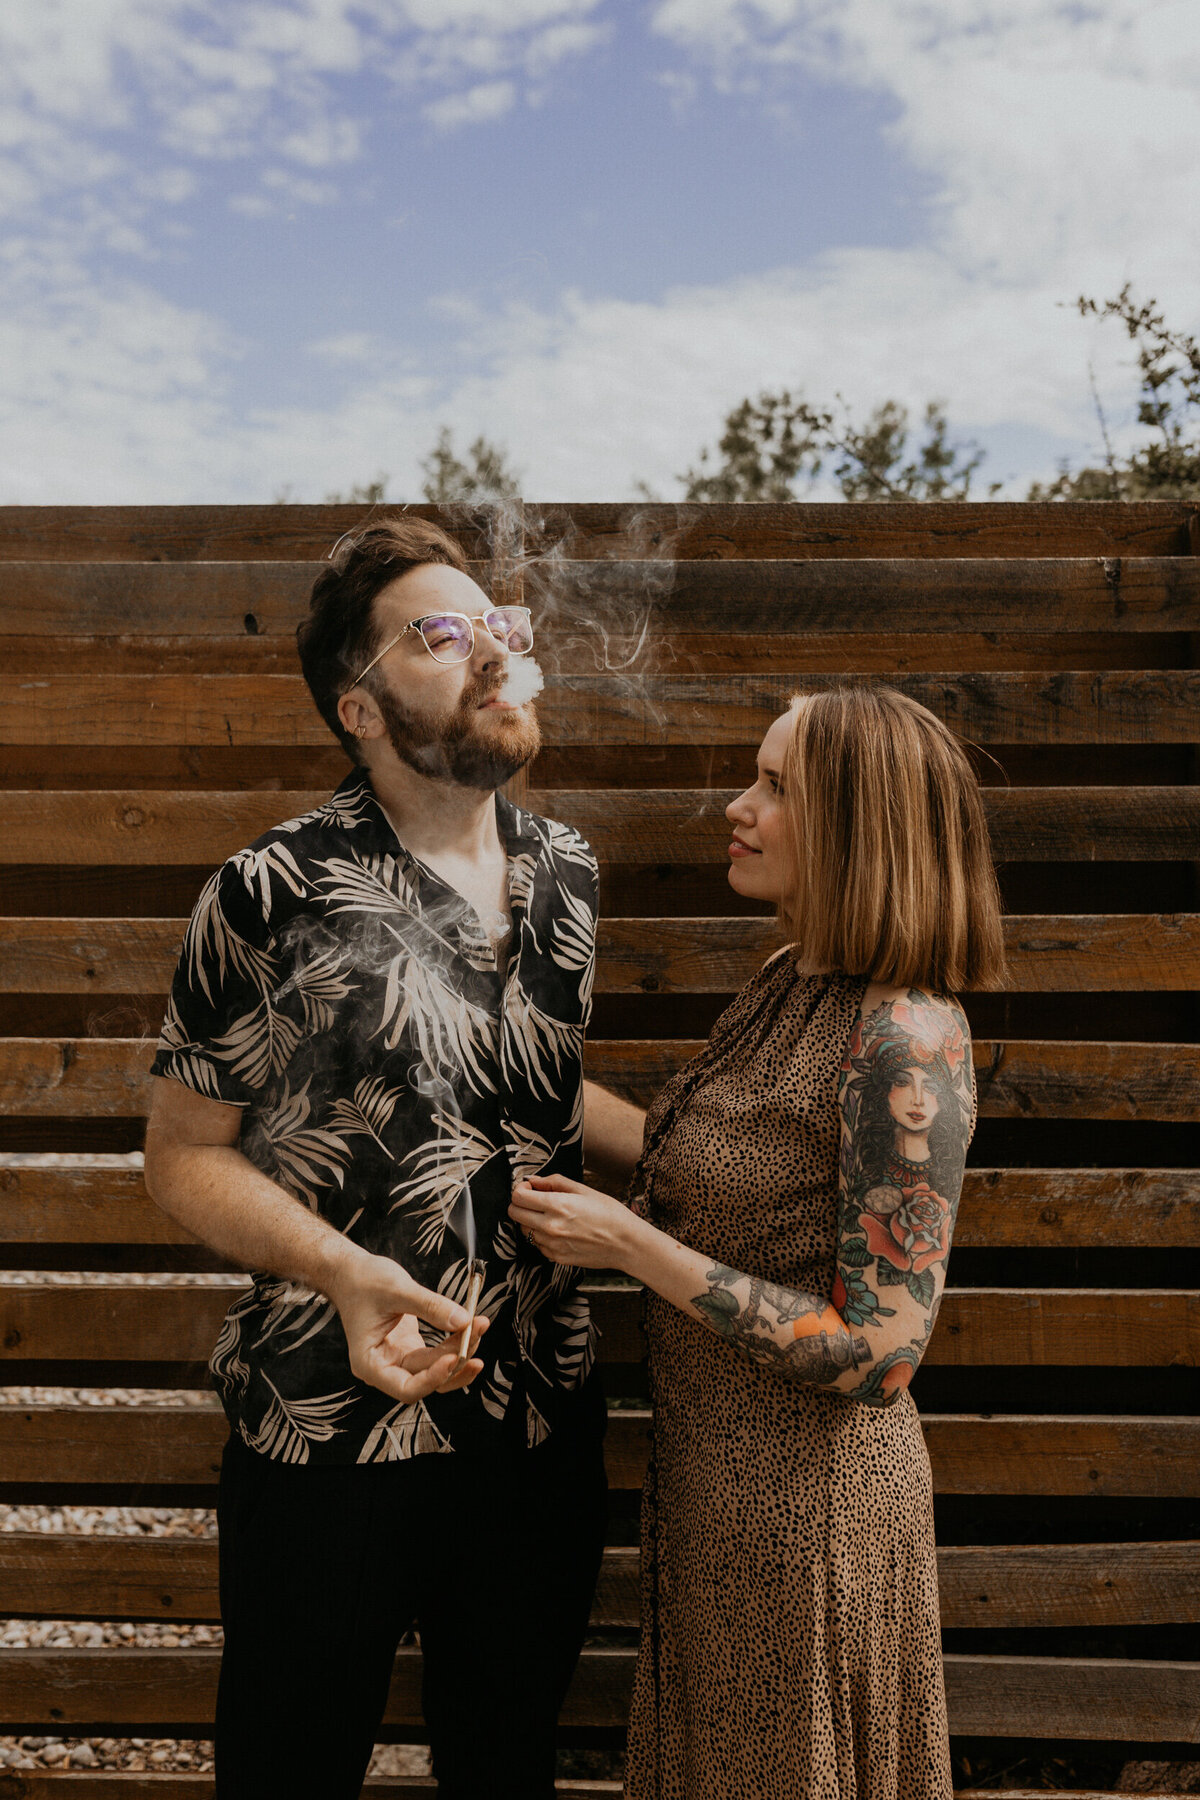 engaged couple smoking weed on porch together laughing